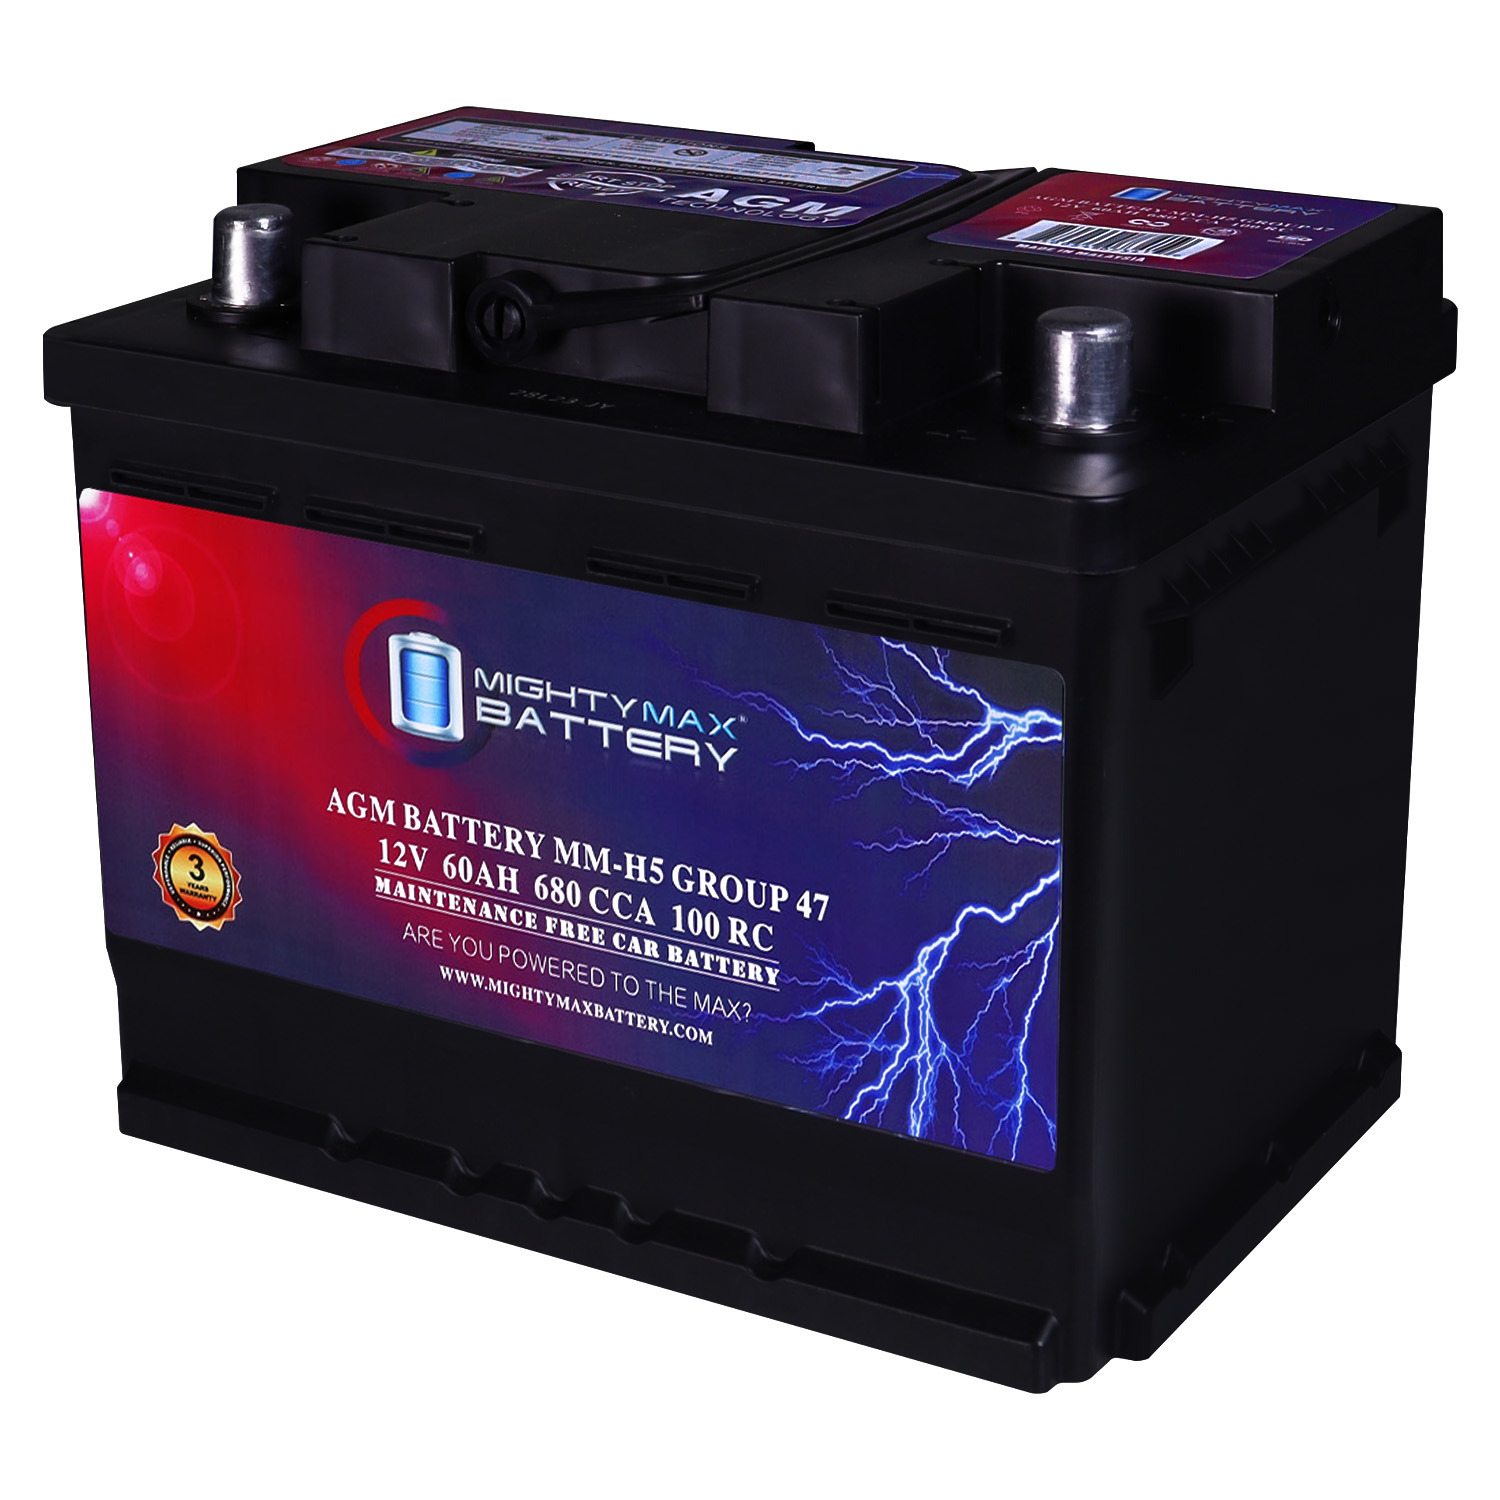 MM-H5 Group 47 12V 60AH 100RC 680CCA Replacement Battery Compatible with Automotive BCI Group 47